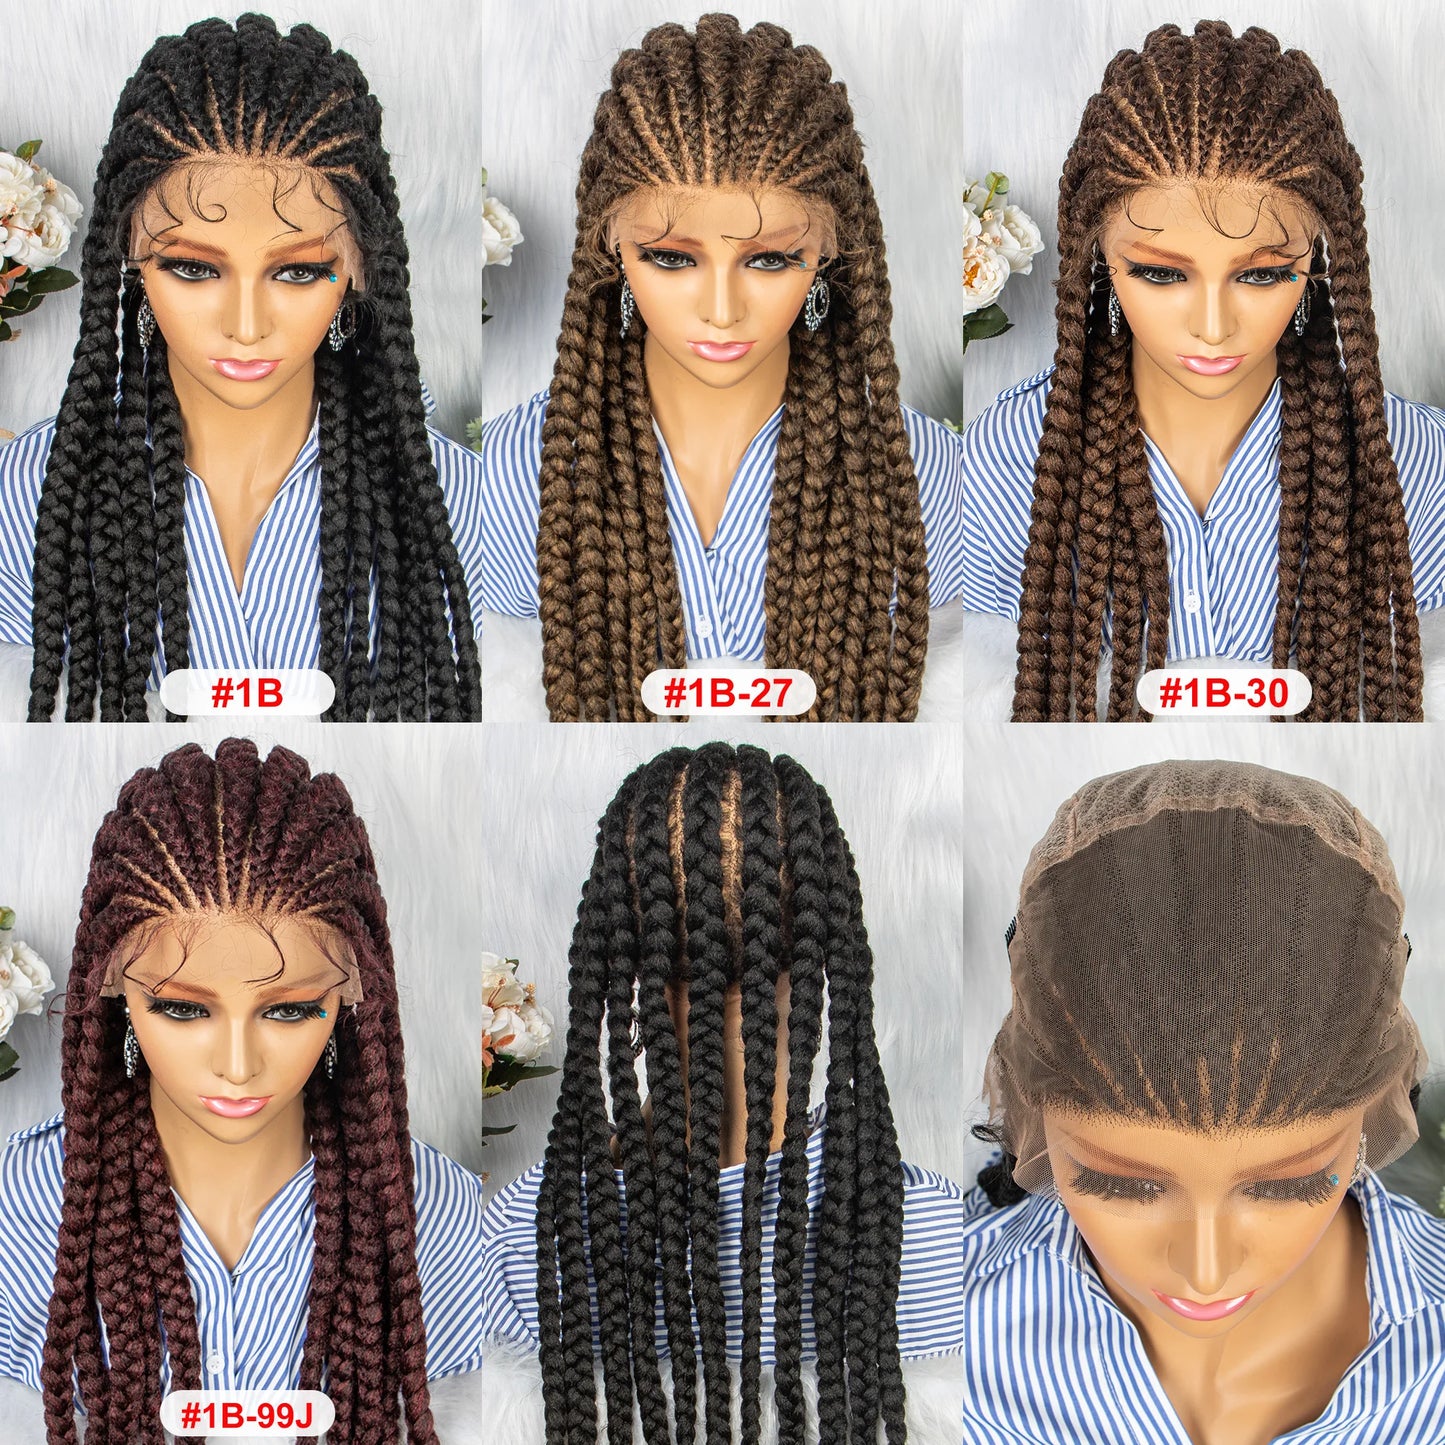 New Arrival Lace Front Wig Braided With Baby Hair 34 inches Braided Full Lace